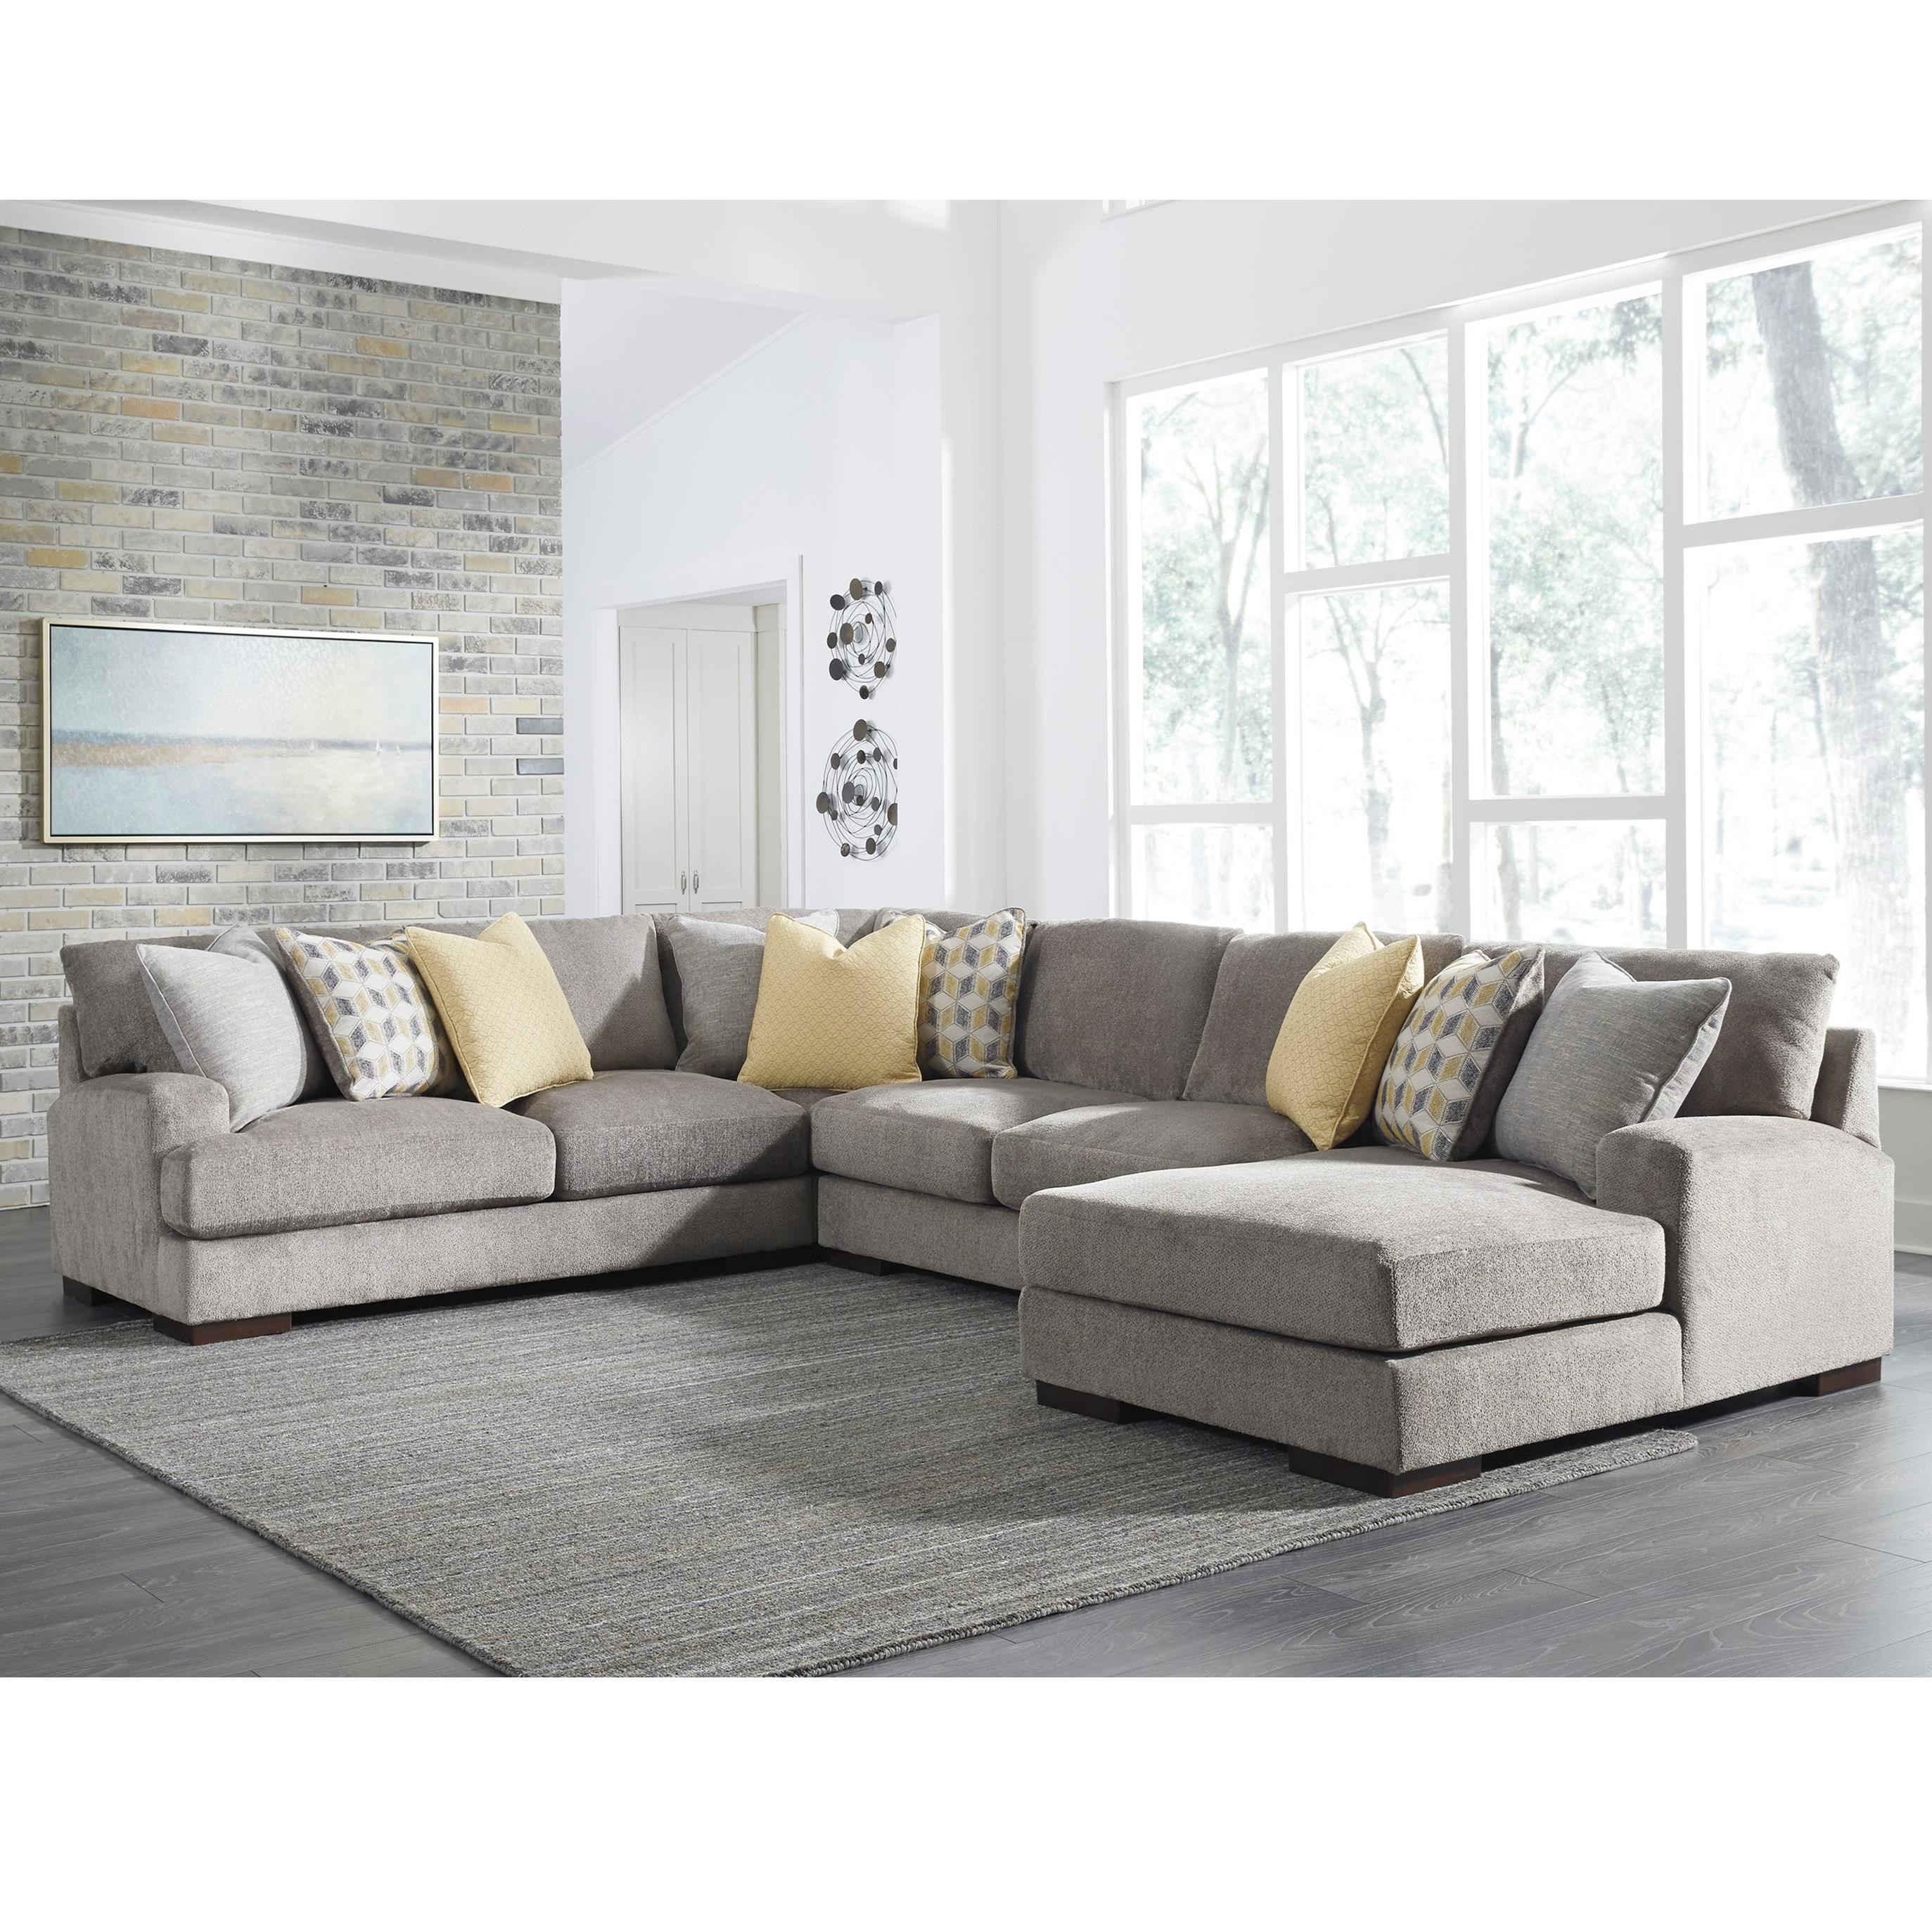 Benchcraft Fallsworth Contemporary 4 Piece Sectional